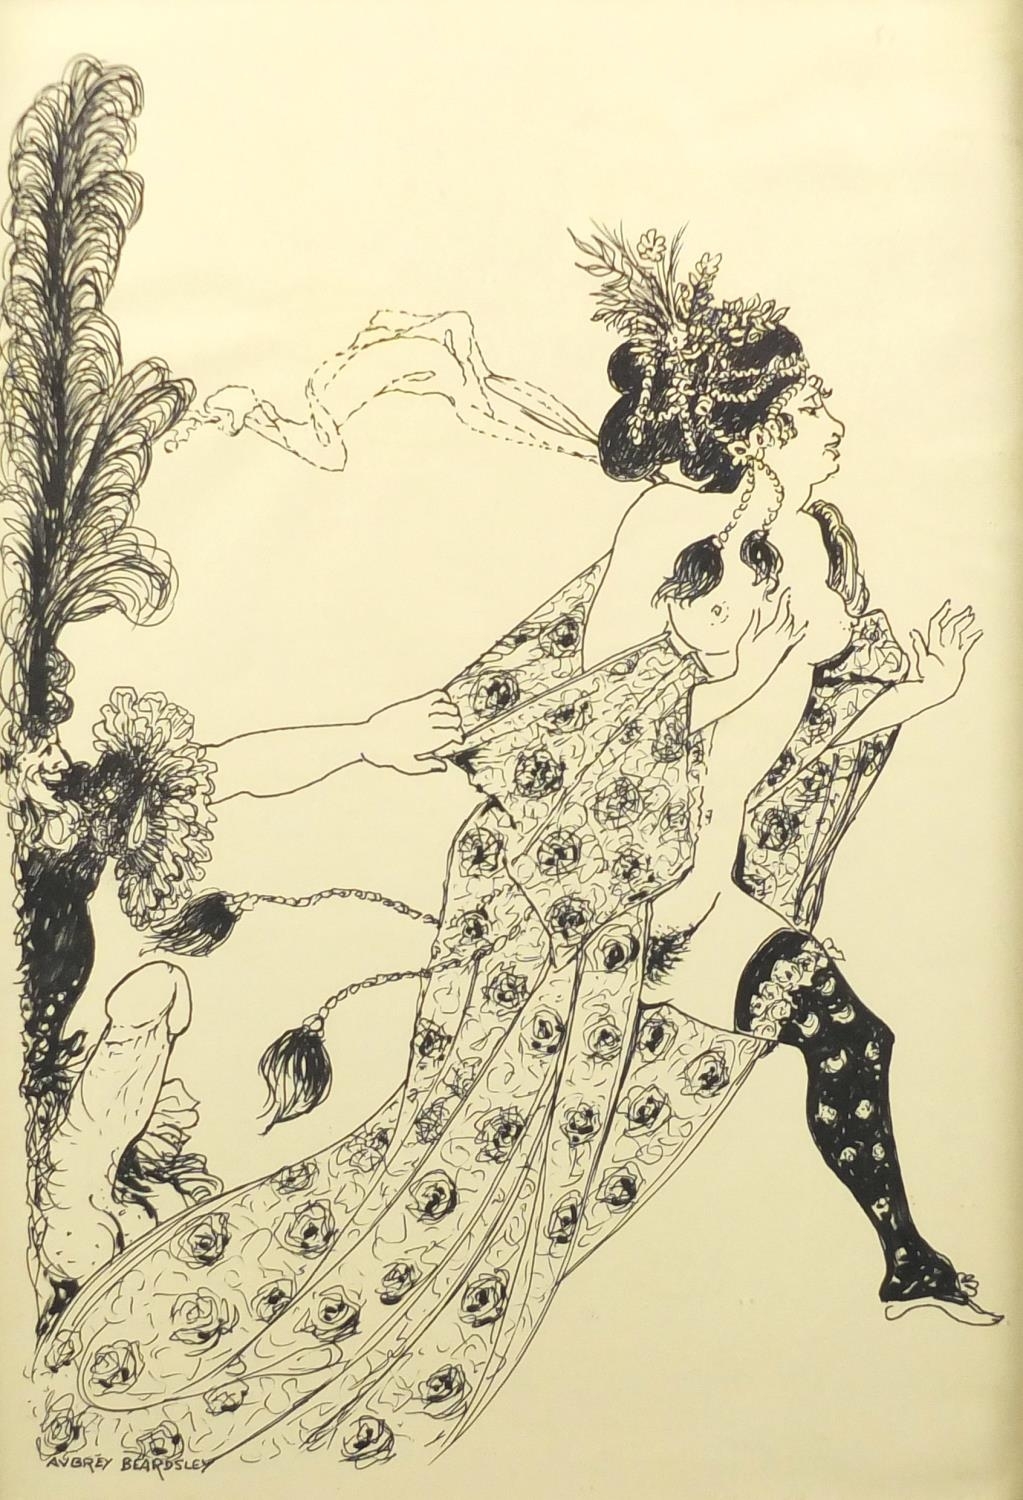 Artwork by Aubrey Beardsley, Manner of Aubrey Beardsley - Erotic theme with nude female, Made of pen and ink, mounted and